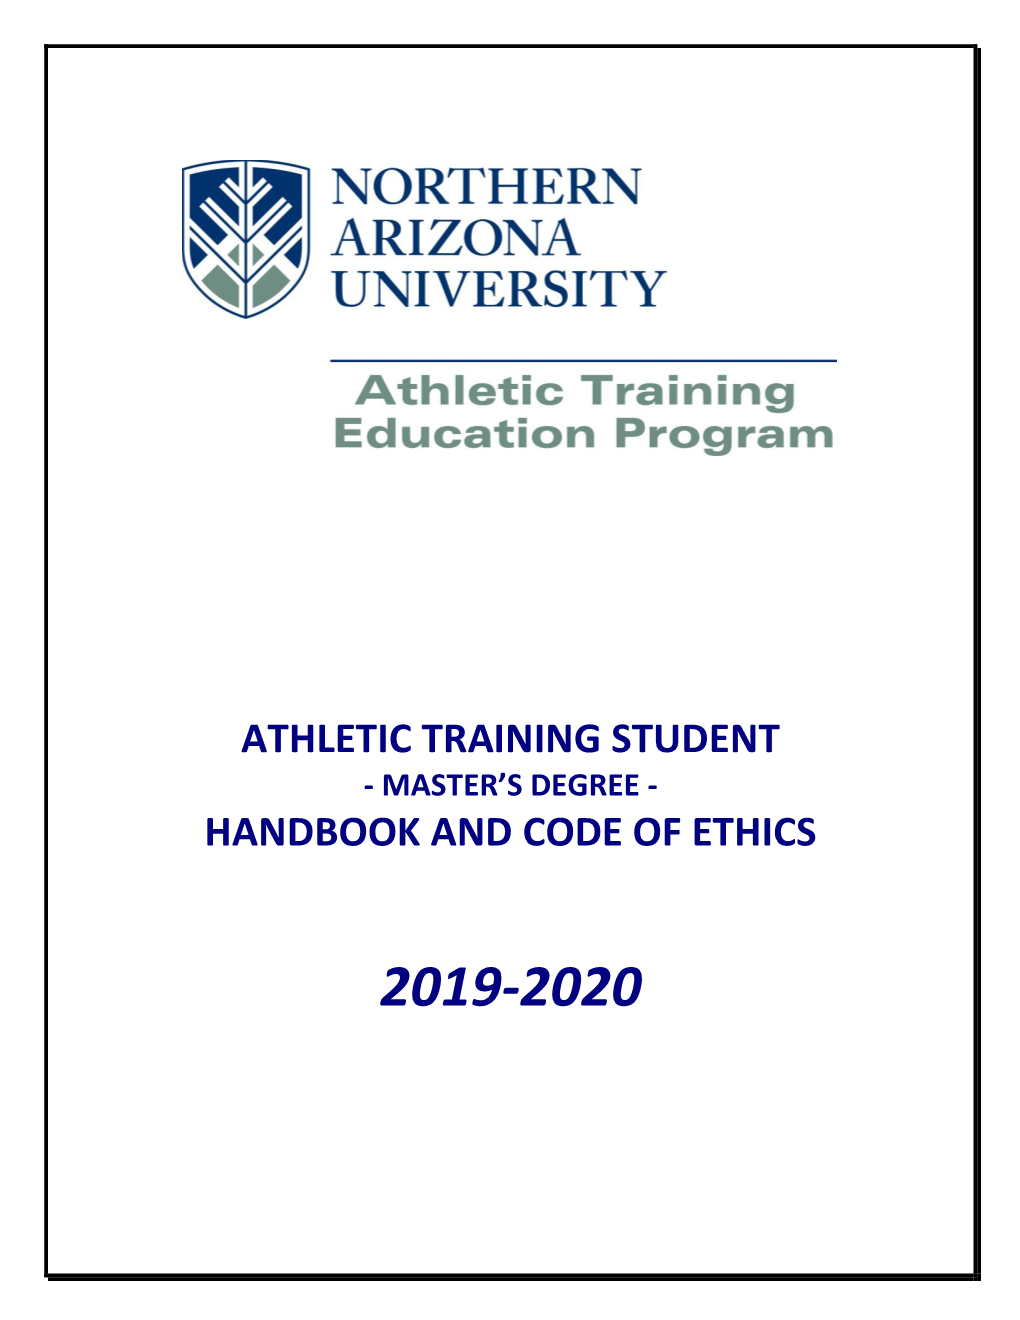 Athletic Training Student Handbook and Code of Ethics